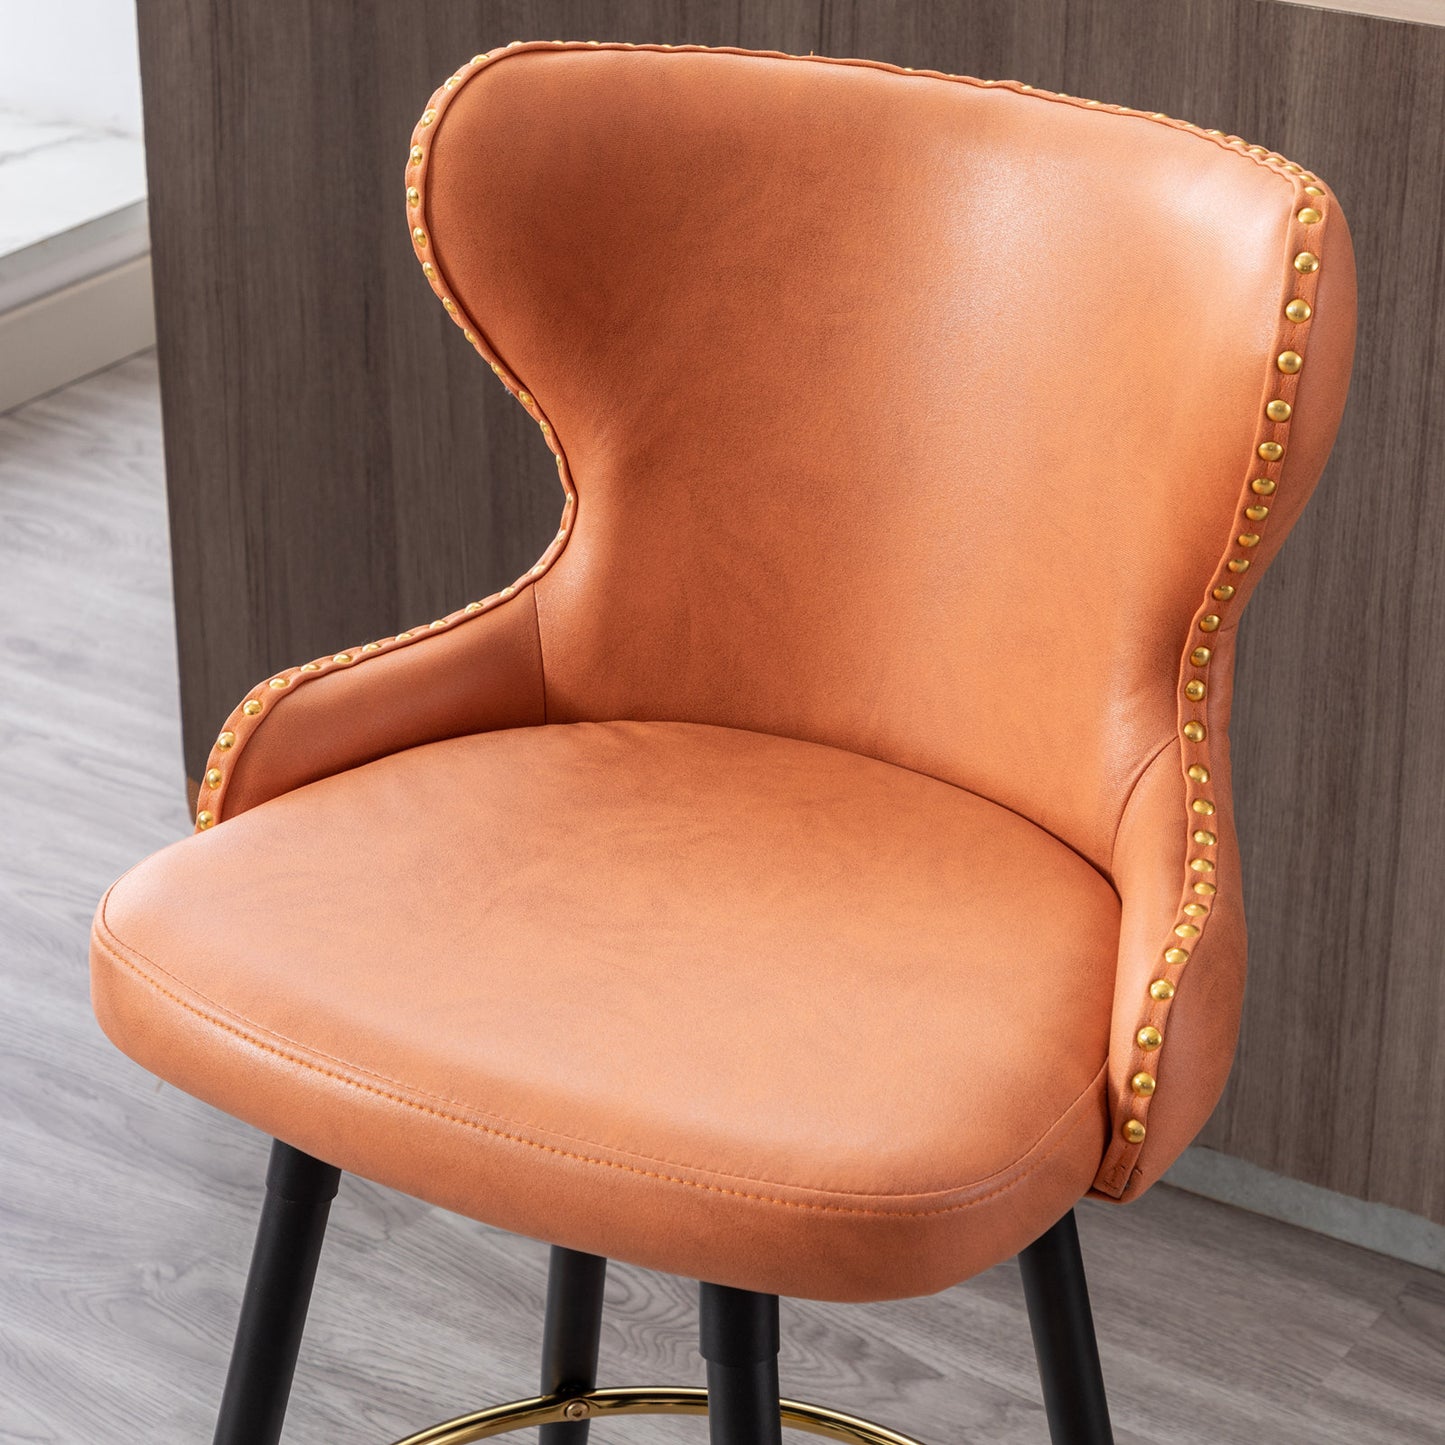 A&A Furniture Counter Height 25" Modern Leathaire Fabric Bar Chairs with Metal Legs Set of 2 - Orange